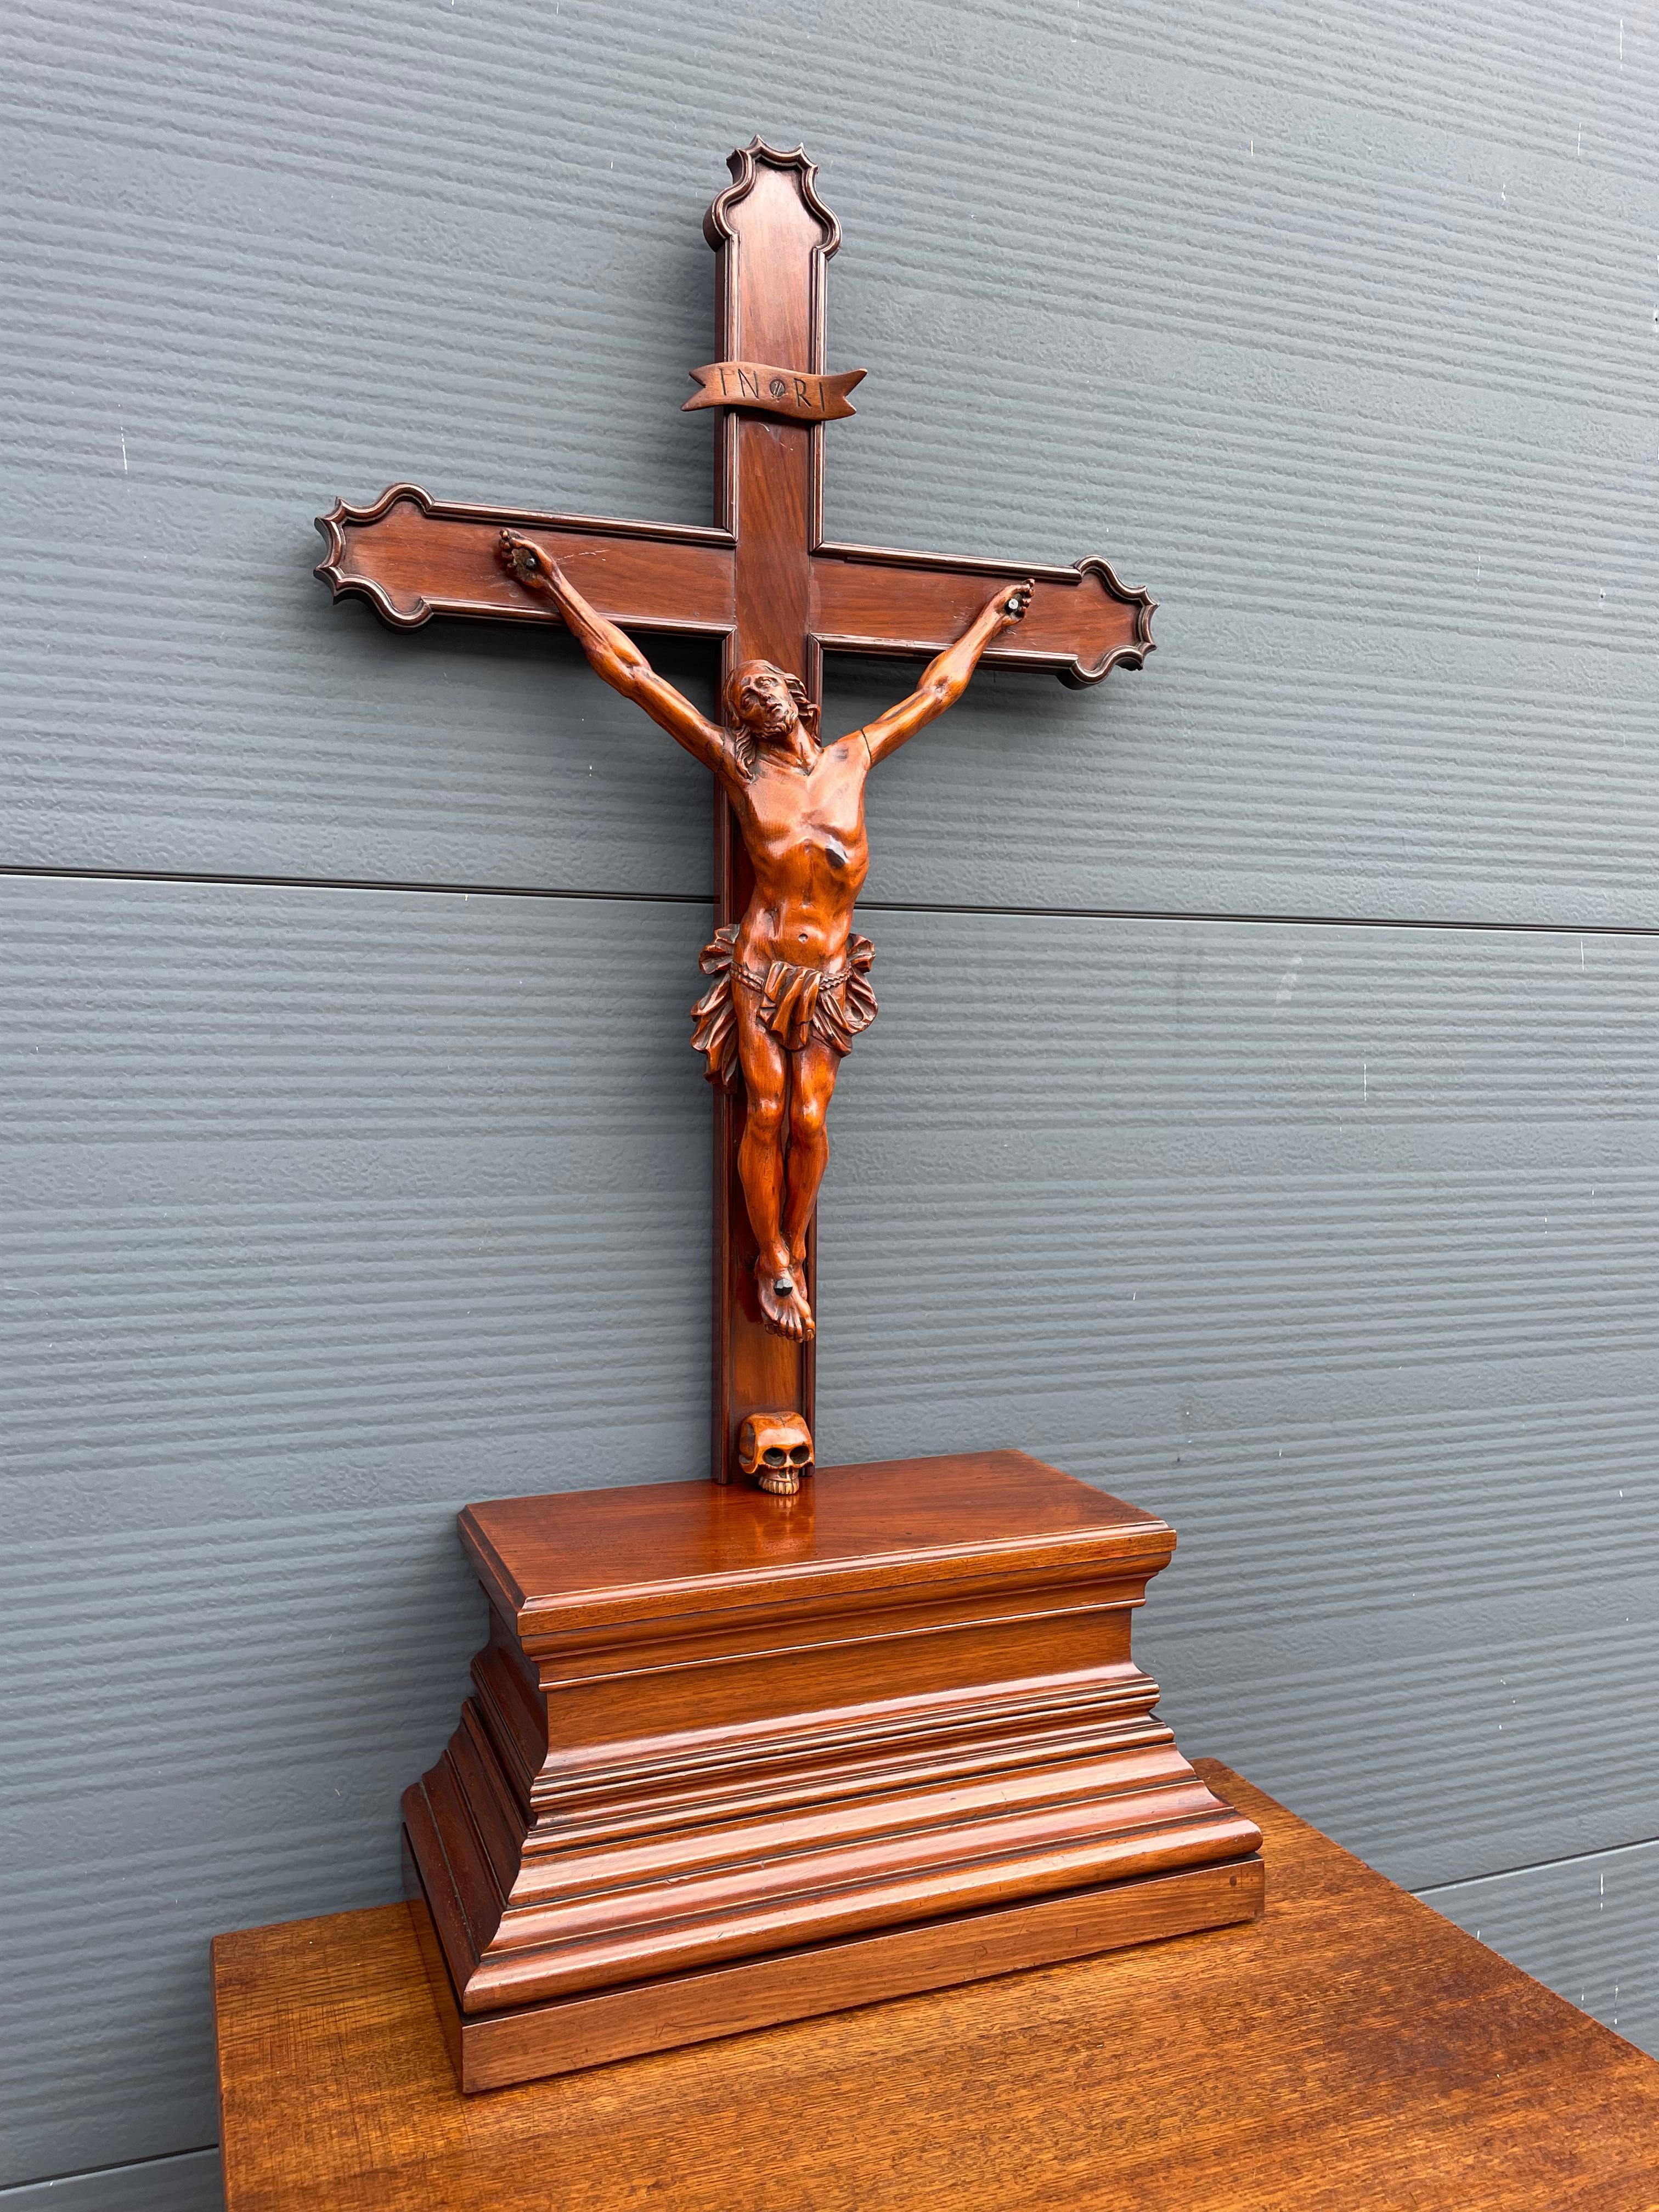 Stunning 19th century altar crucifix with a secret bible compartment in the base.

Over the decades we have sold a number of unique and very well crafted crucifixes, but never one with such an amazing patina or with a compartment in the base. Not